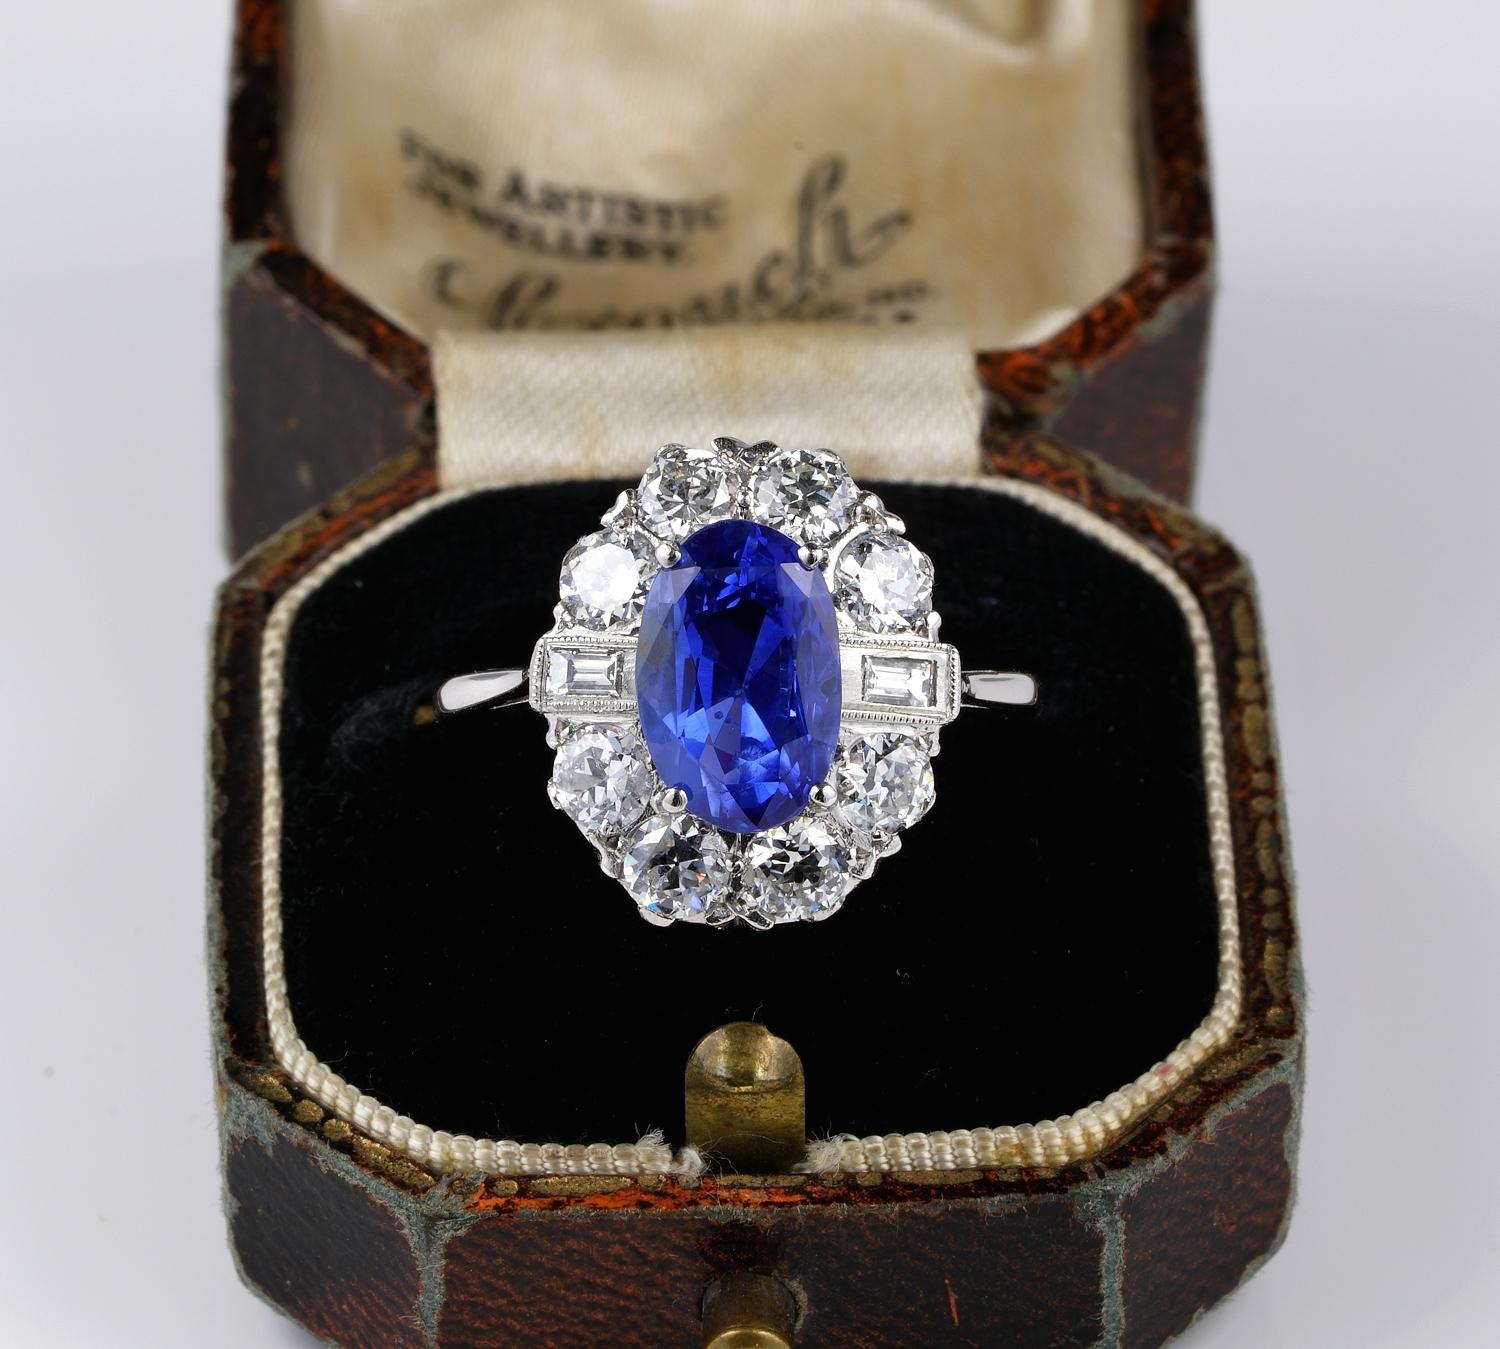 The Appeal Of Blue Sapphire

Blue sapphires have captured the collective adoration of people across centuries, symbol of love, loyalty, power, and wisdom
This extraordinary  ring is powerful in beauty
very well hand constructed in solid